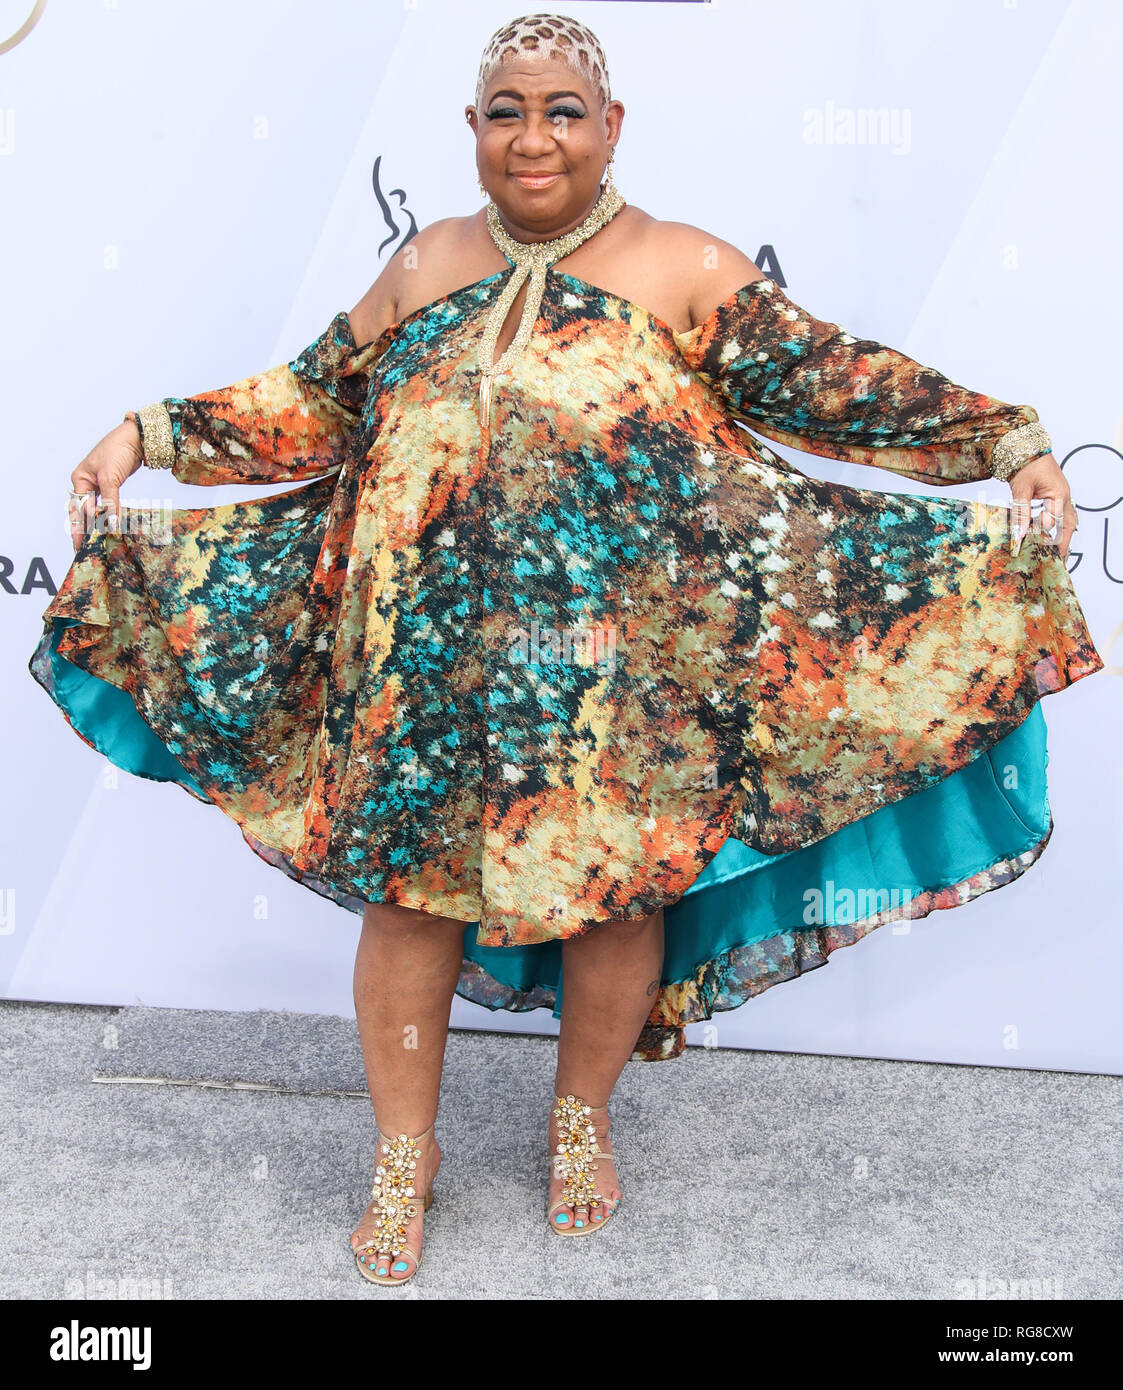 Los Angeles, United States. 27th Jan, 2019. LOS ANGELES, CA, USA - JANUARY 27: Luenell arrives at the 25th Annual Screen Actors Guild Awards held at The Shrine Auditorium on January 27, 2019 in Los Angeles, California, United States. (Photo by Xavier Collin/Image Press Agency) Credit: Image Press Agency/Alamy Live News Stock Photo